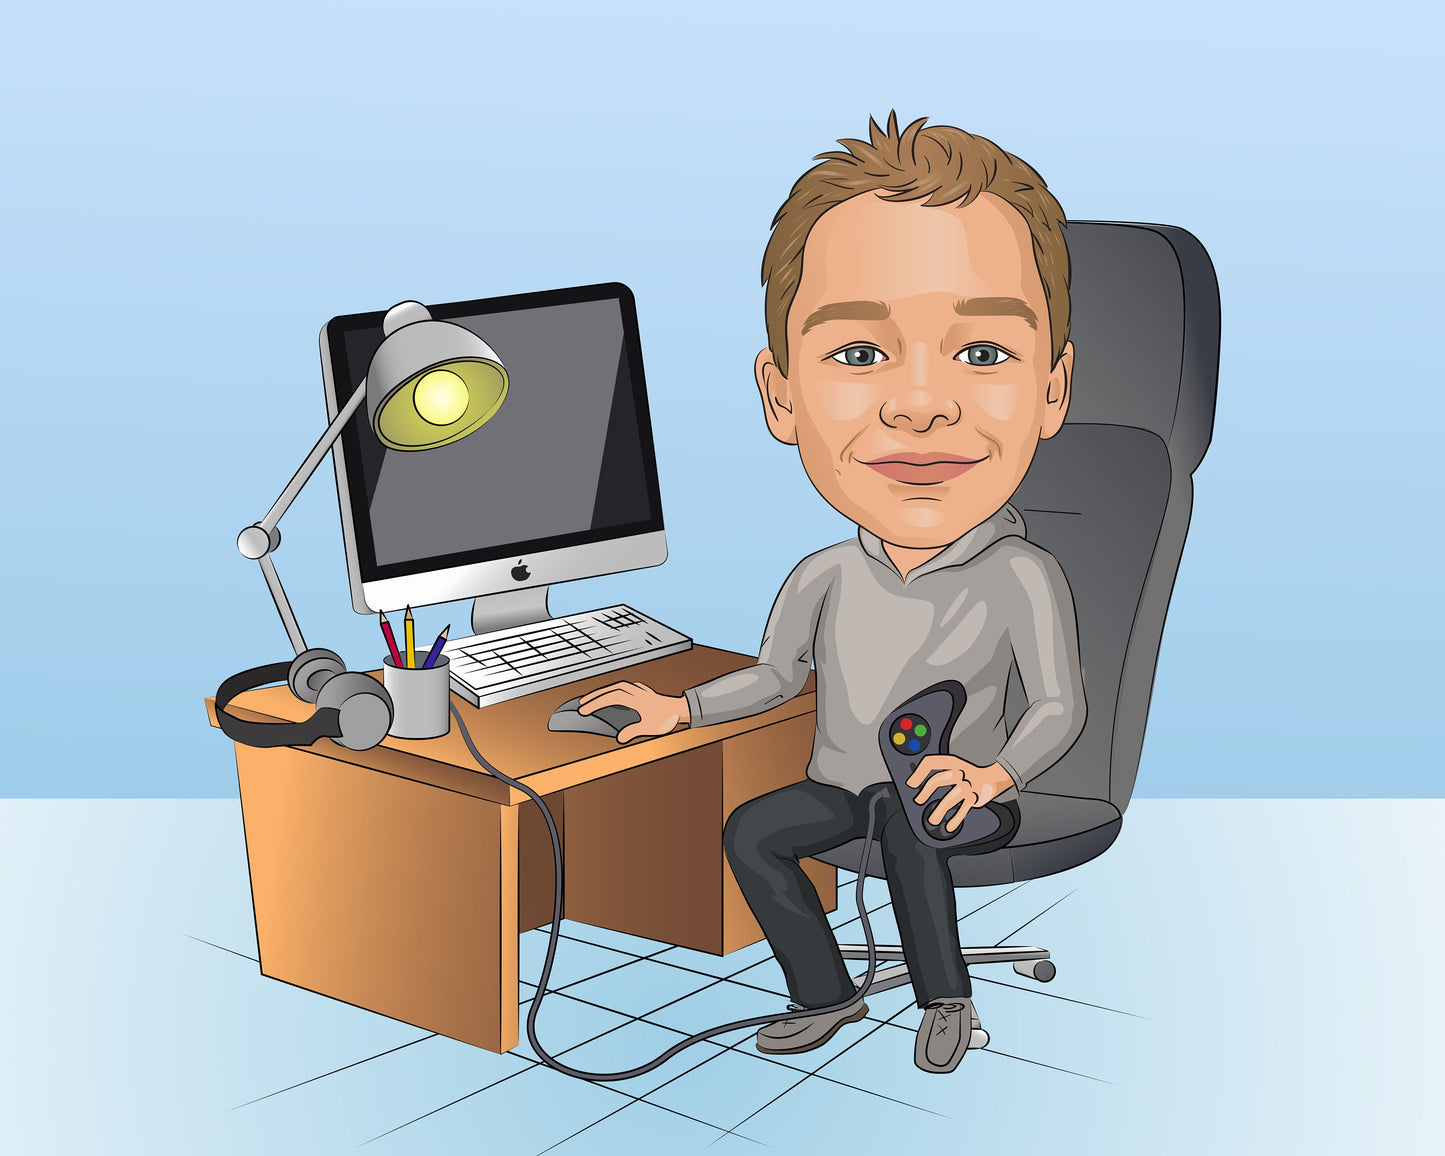 Gamer Gift - Custom Caricature Portrait From Your Photo/gaming cartoon